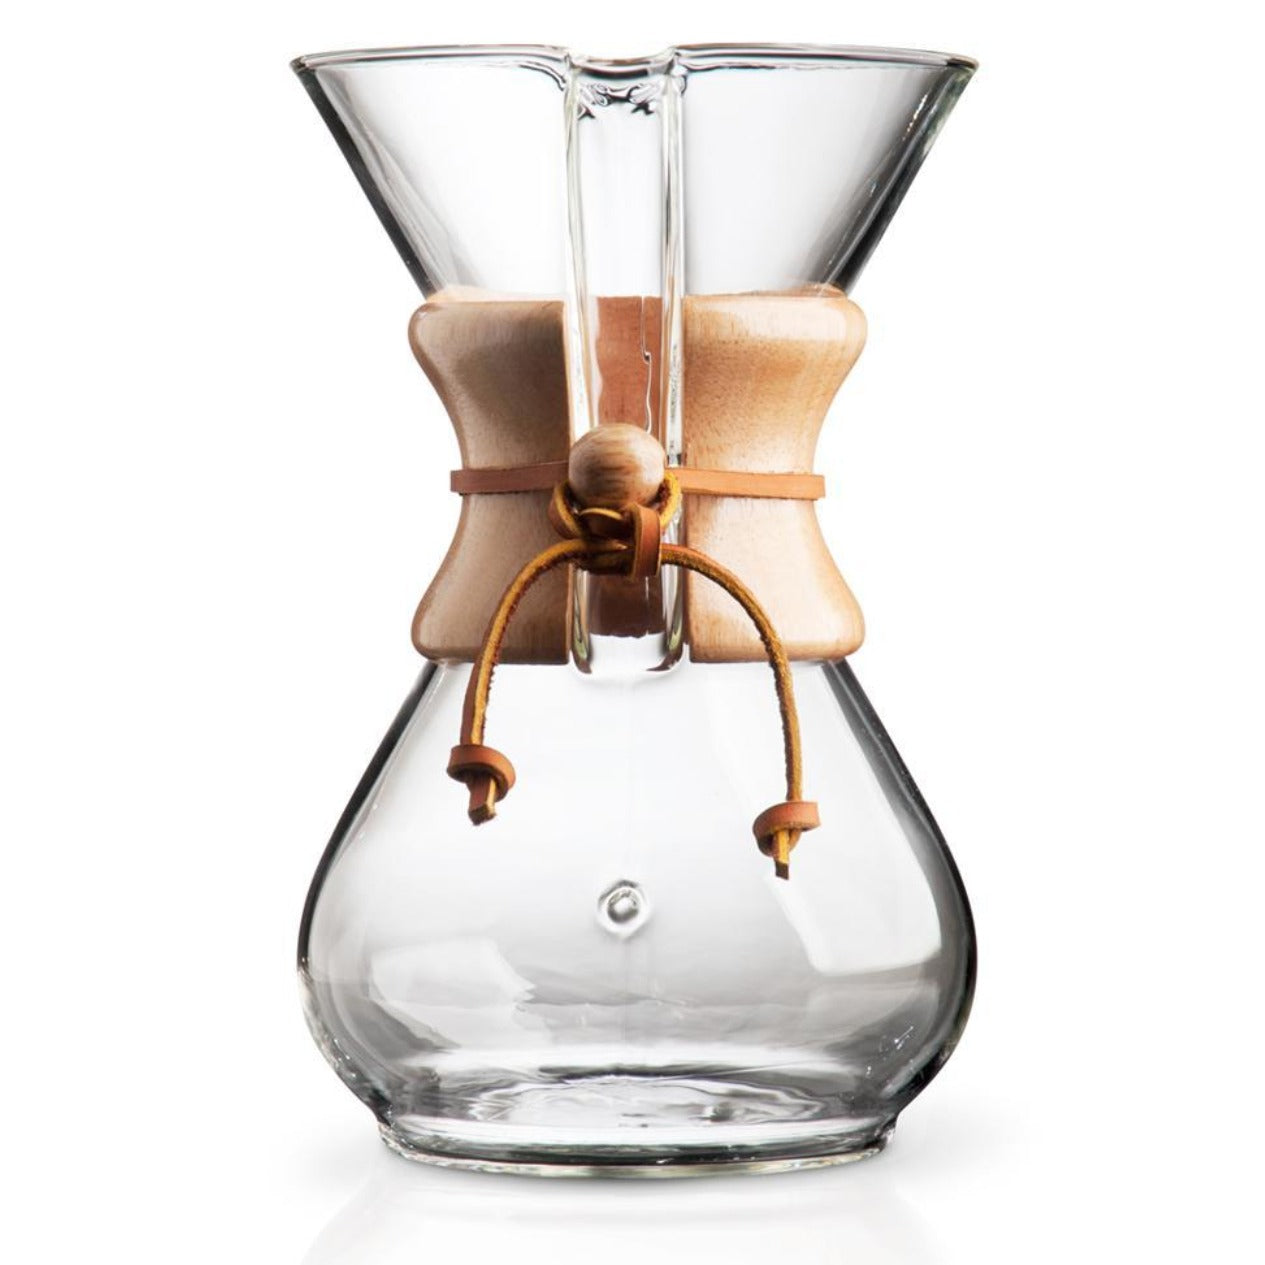 Chemex Coffee. The perfect step-by-step guide to…